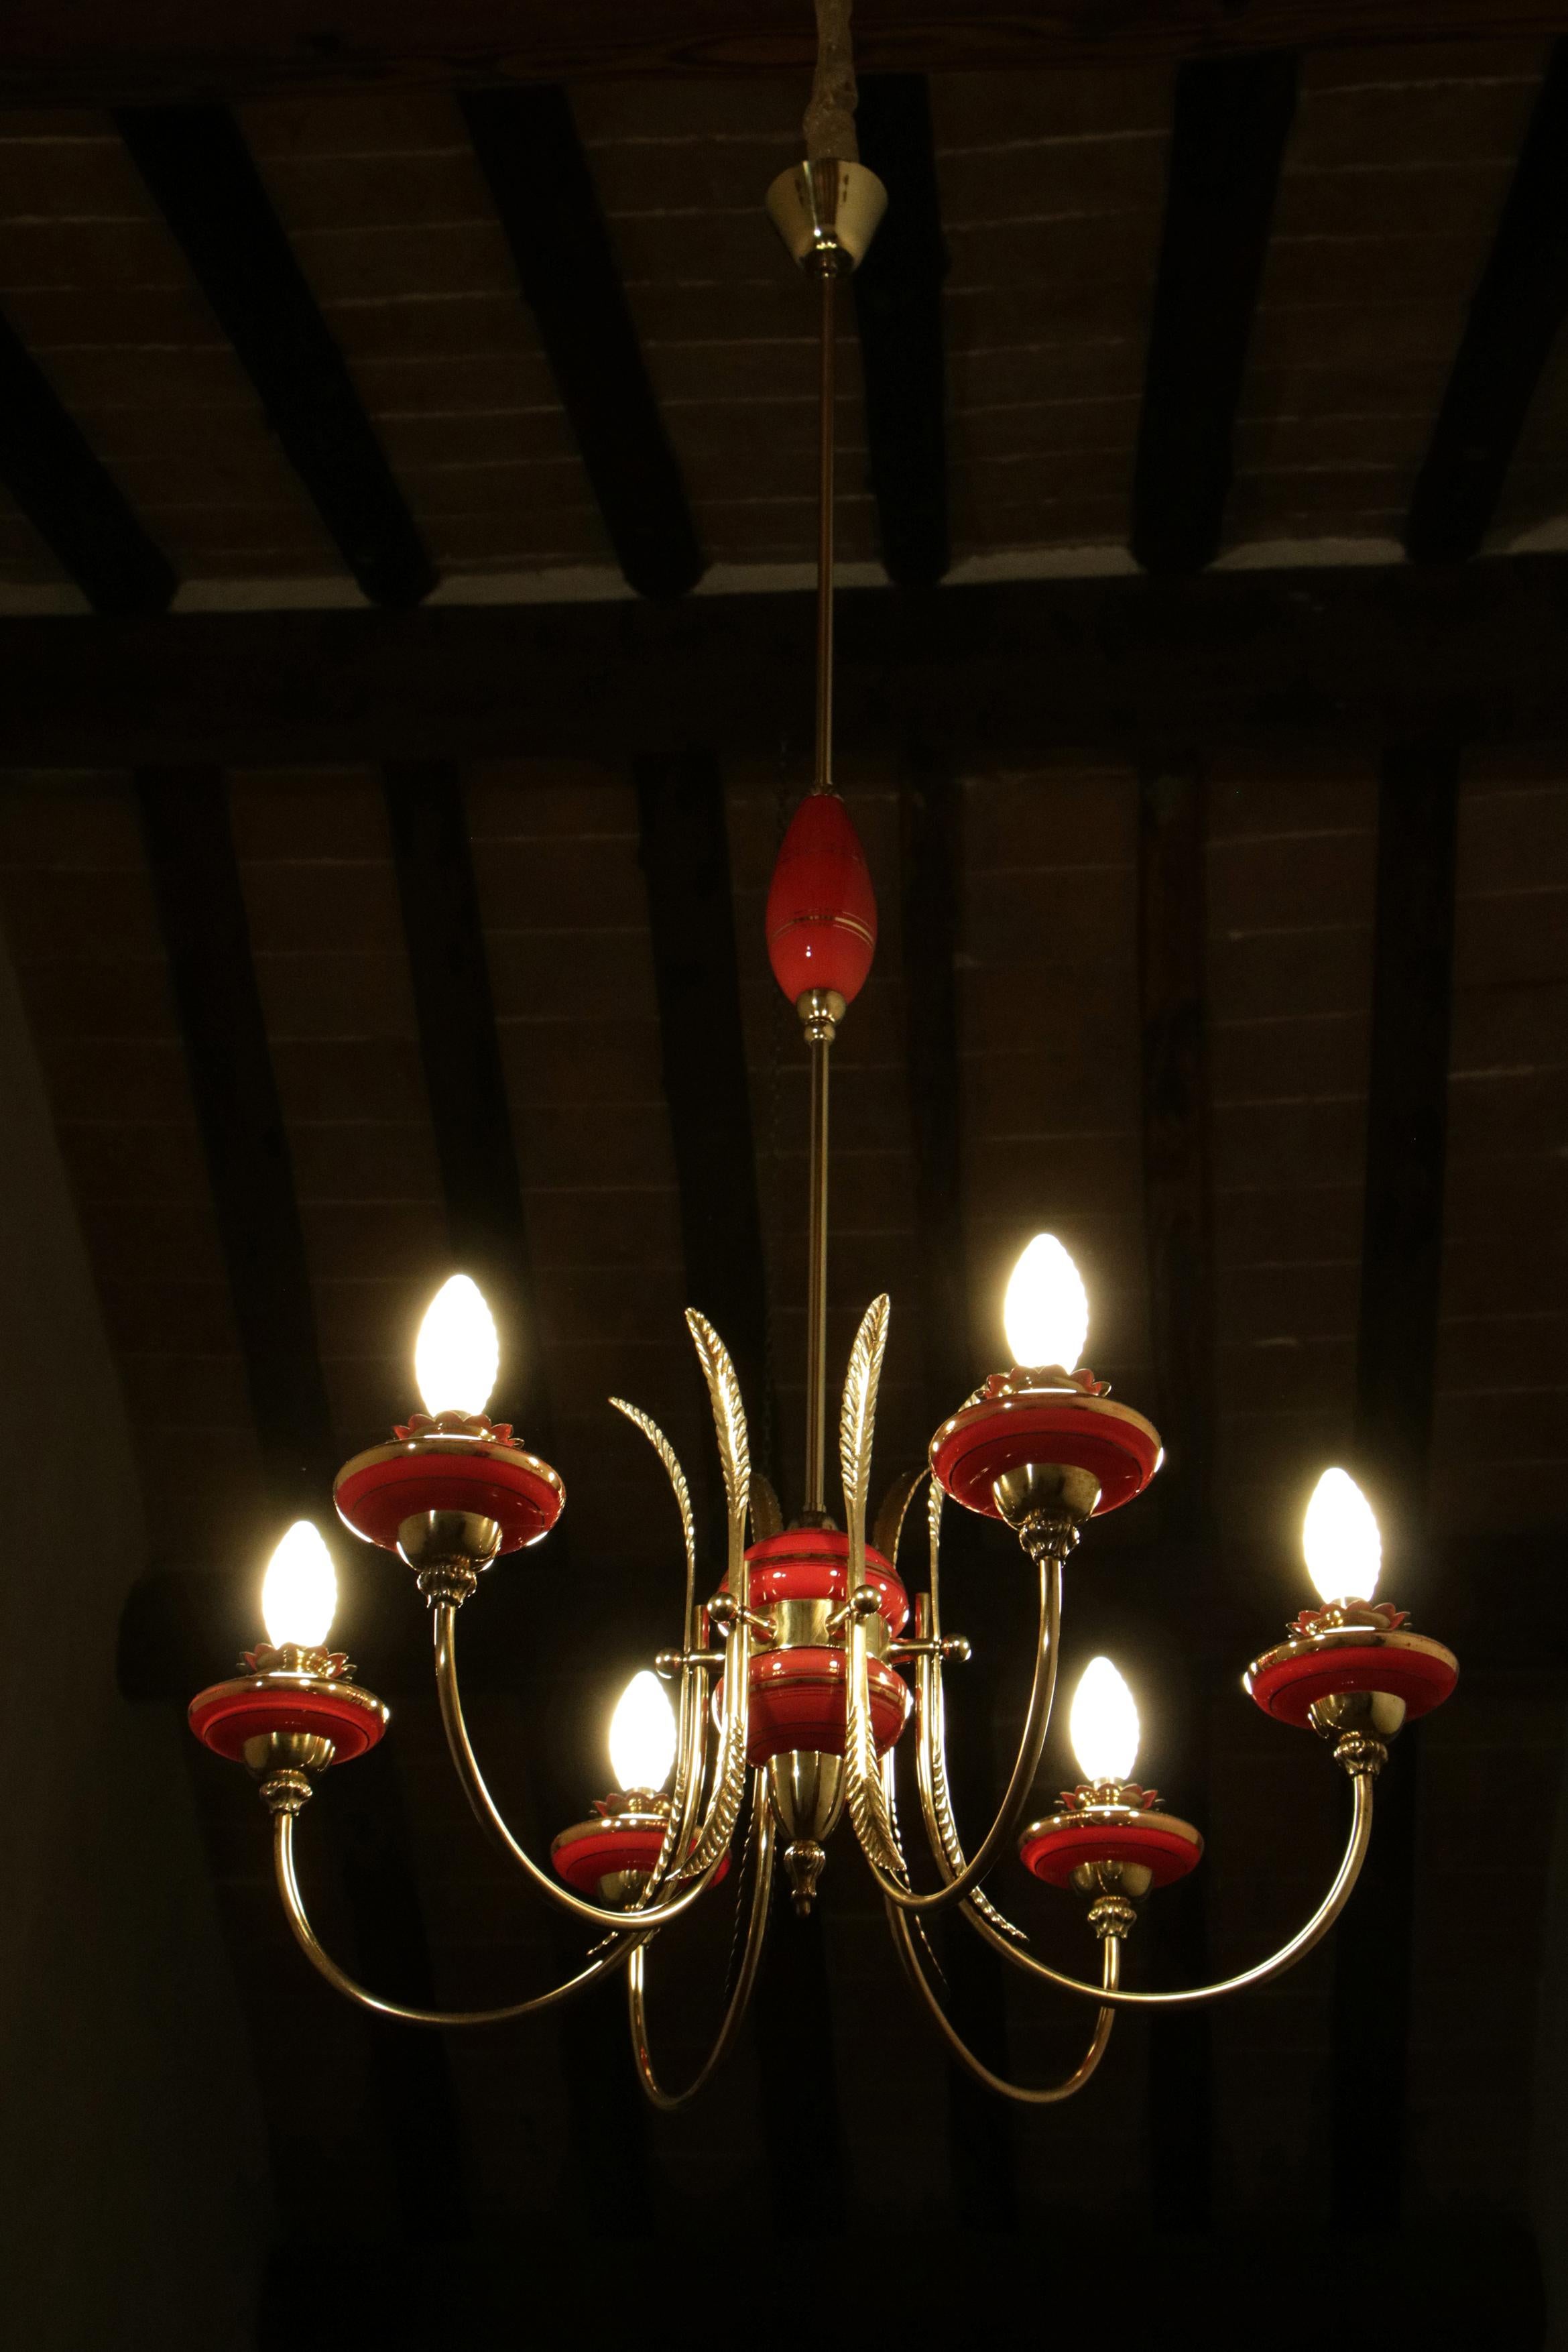 Beautiful Italian Mid-Century Modern chandelier with six lights from the 50'. The structure is made of high-quality antique brass and red Murano glass with gold color details. Gio Ponti's models inspired this chandelier, and it is a splendid example